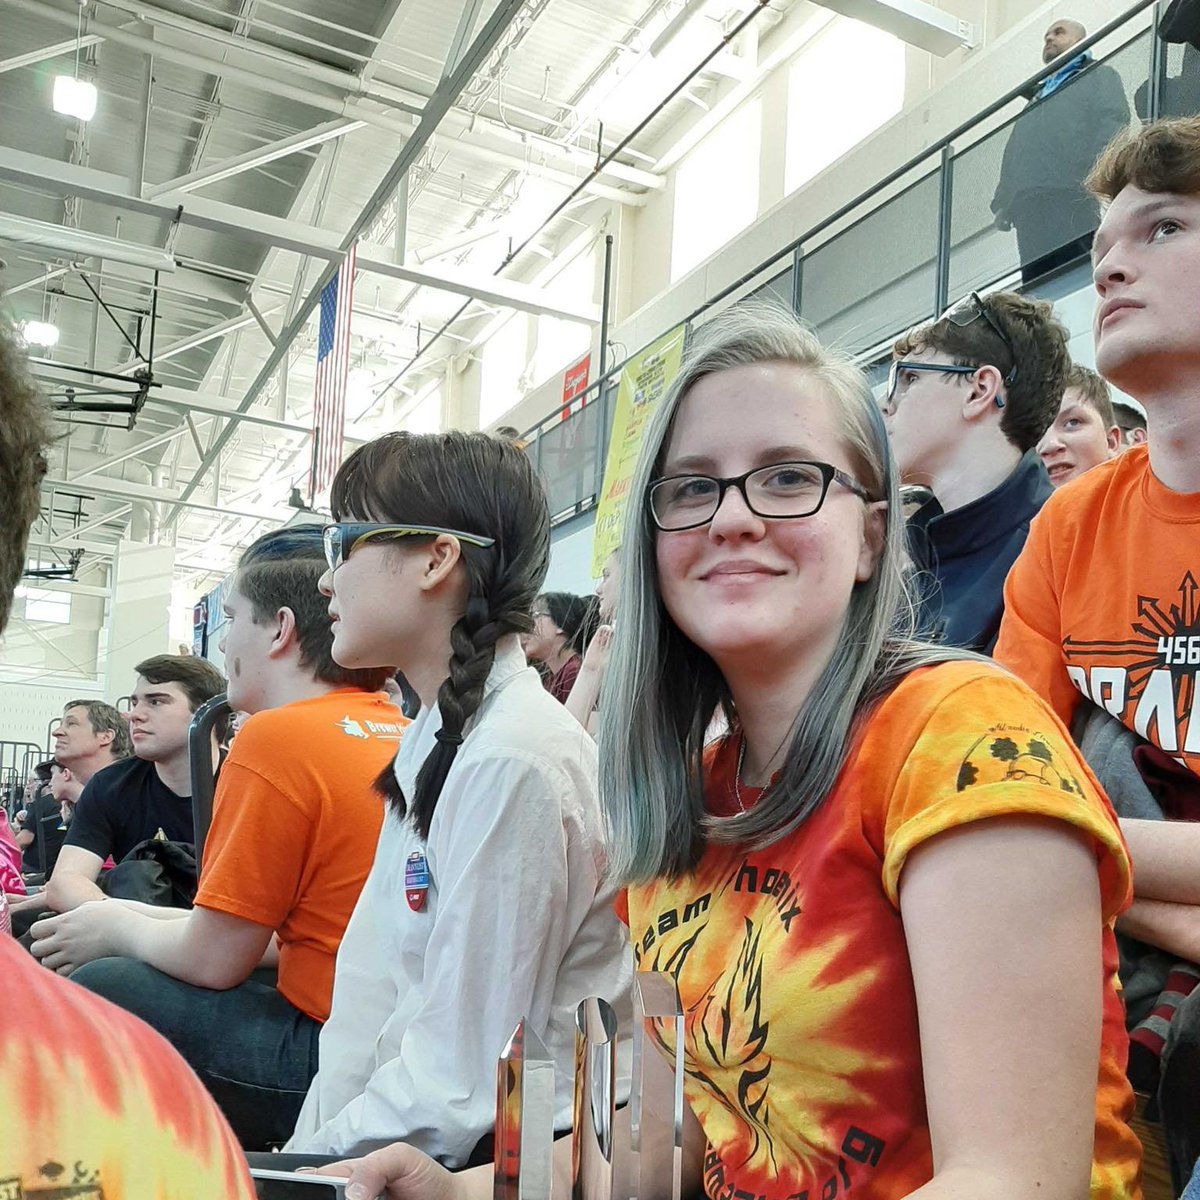 We won the Imagery Award! Mr. Bewley was nominated for the Woodie Flowers Award and Ali (Fabrication Lead) and Shaylie (CAD Lead) were both nominated for the Deans List award (as nominees, they are both Semi-Finalists). We are looking forward to our next competition in Bedford!